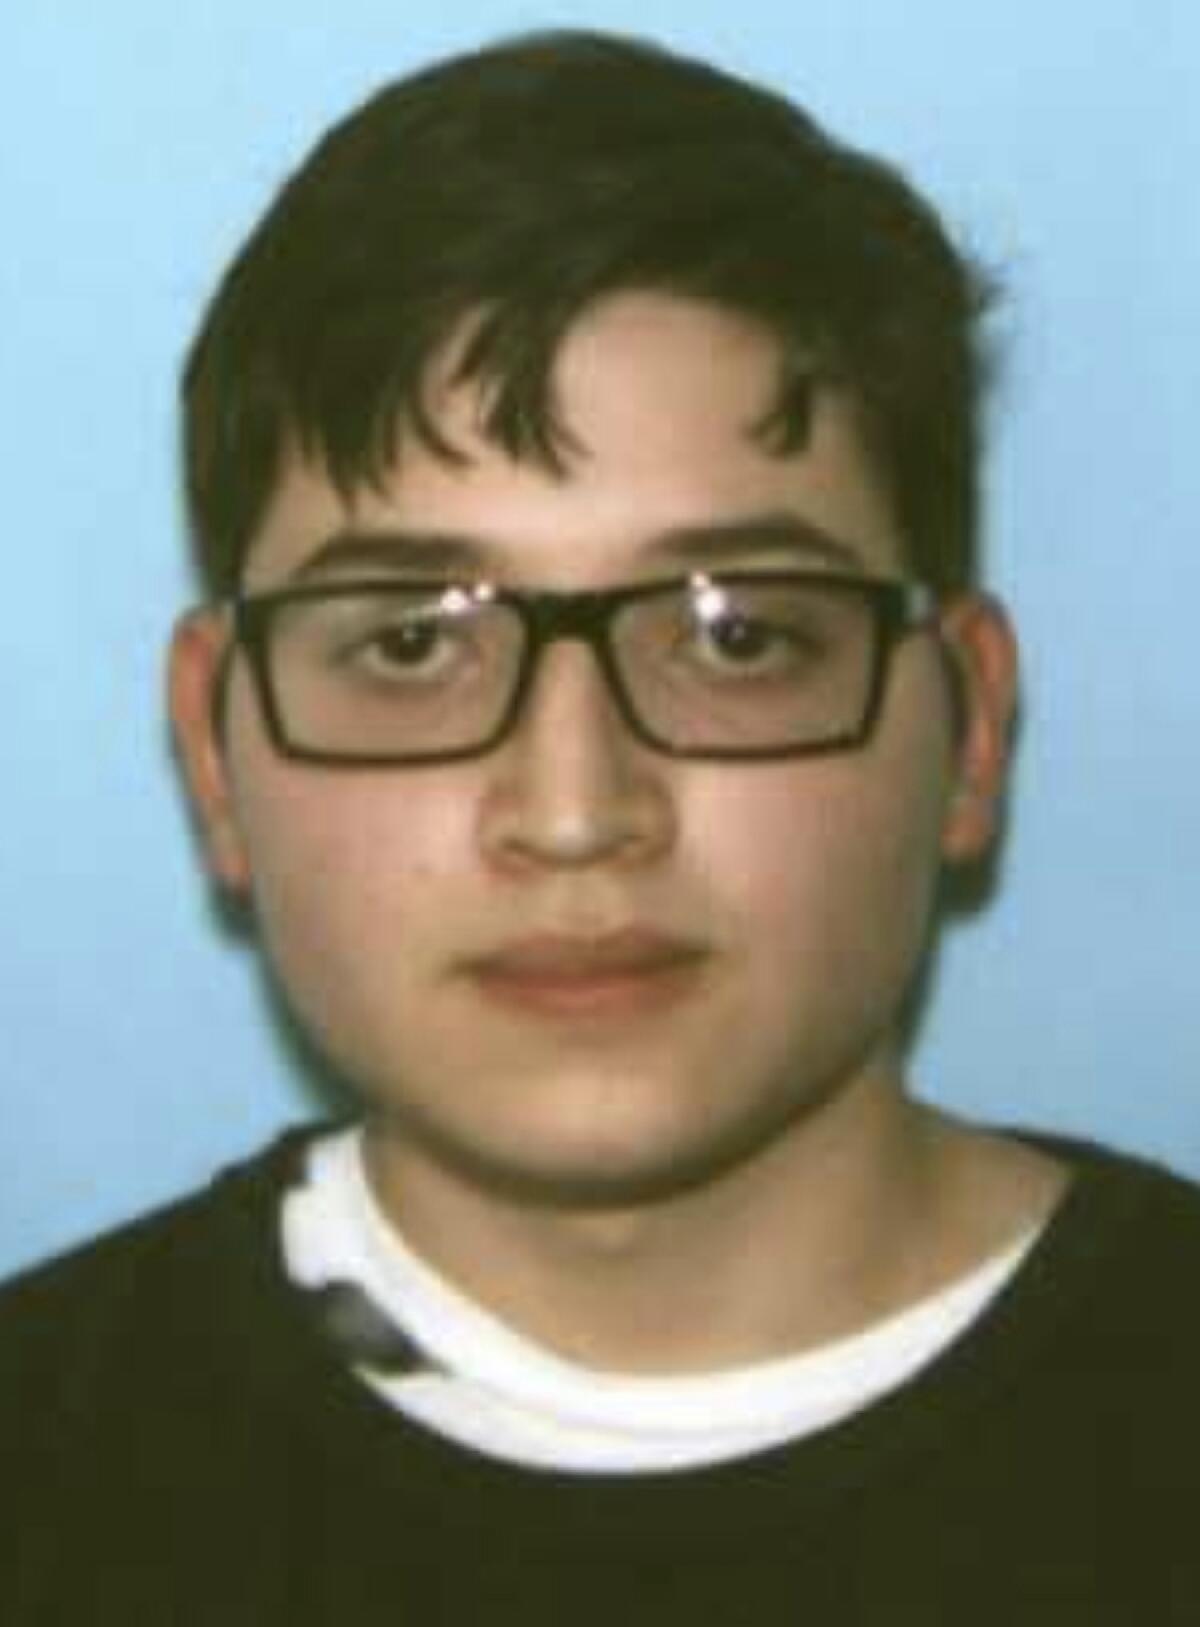 This image released but the Washington County, Md., Sheriff's Office, shows Joe Louis Esquivel, 23, of Hedgesville, W.Va., who was charged with murdering three co-workers at a Maryland machine shop as well as attempted murder and other charges, authorities said late Friday, June 10, 2022. (Washington County, Md., Sheriff's Office via AP)